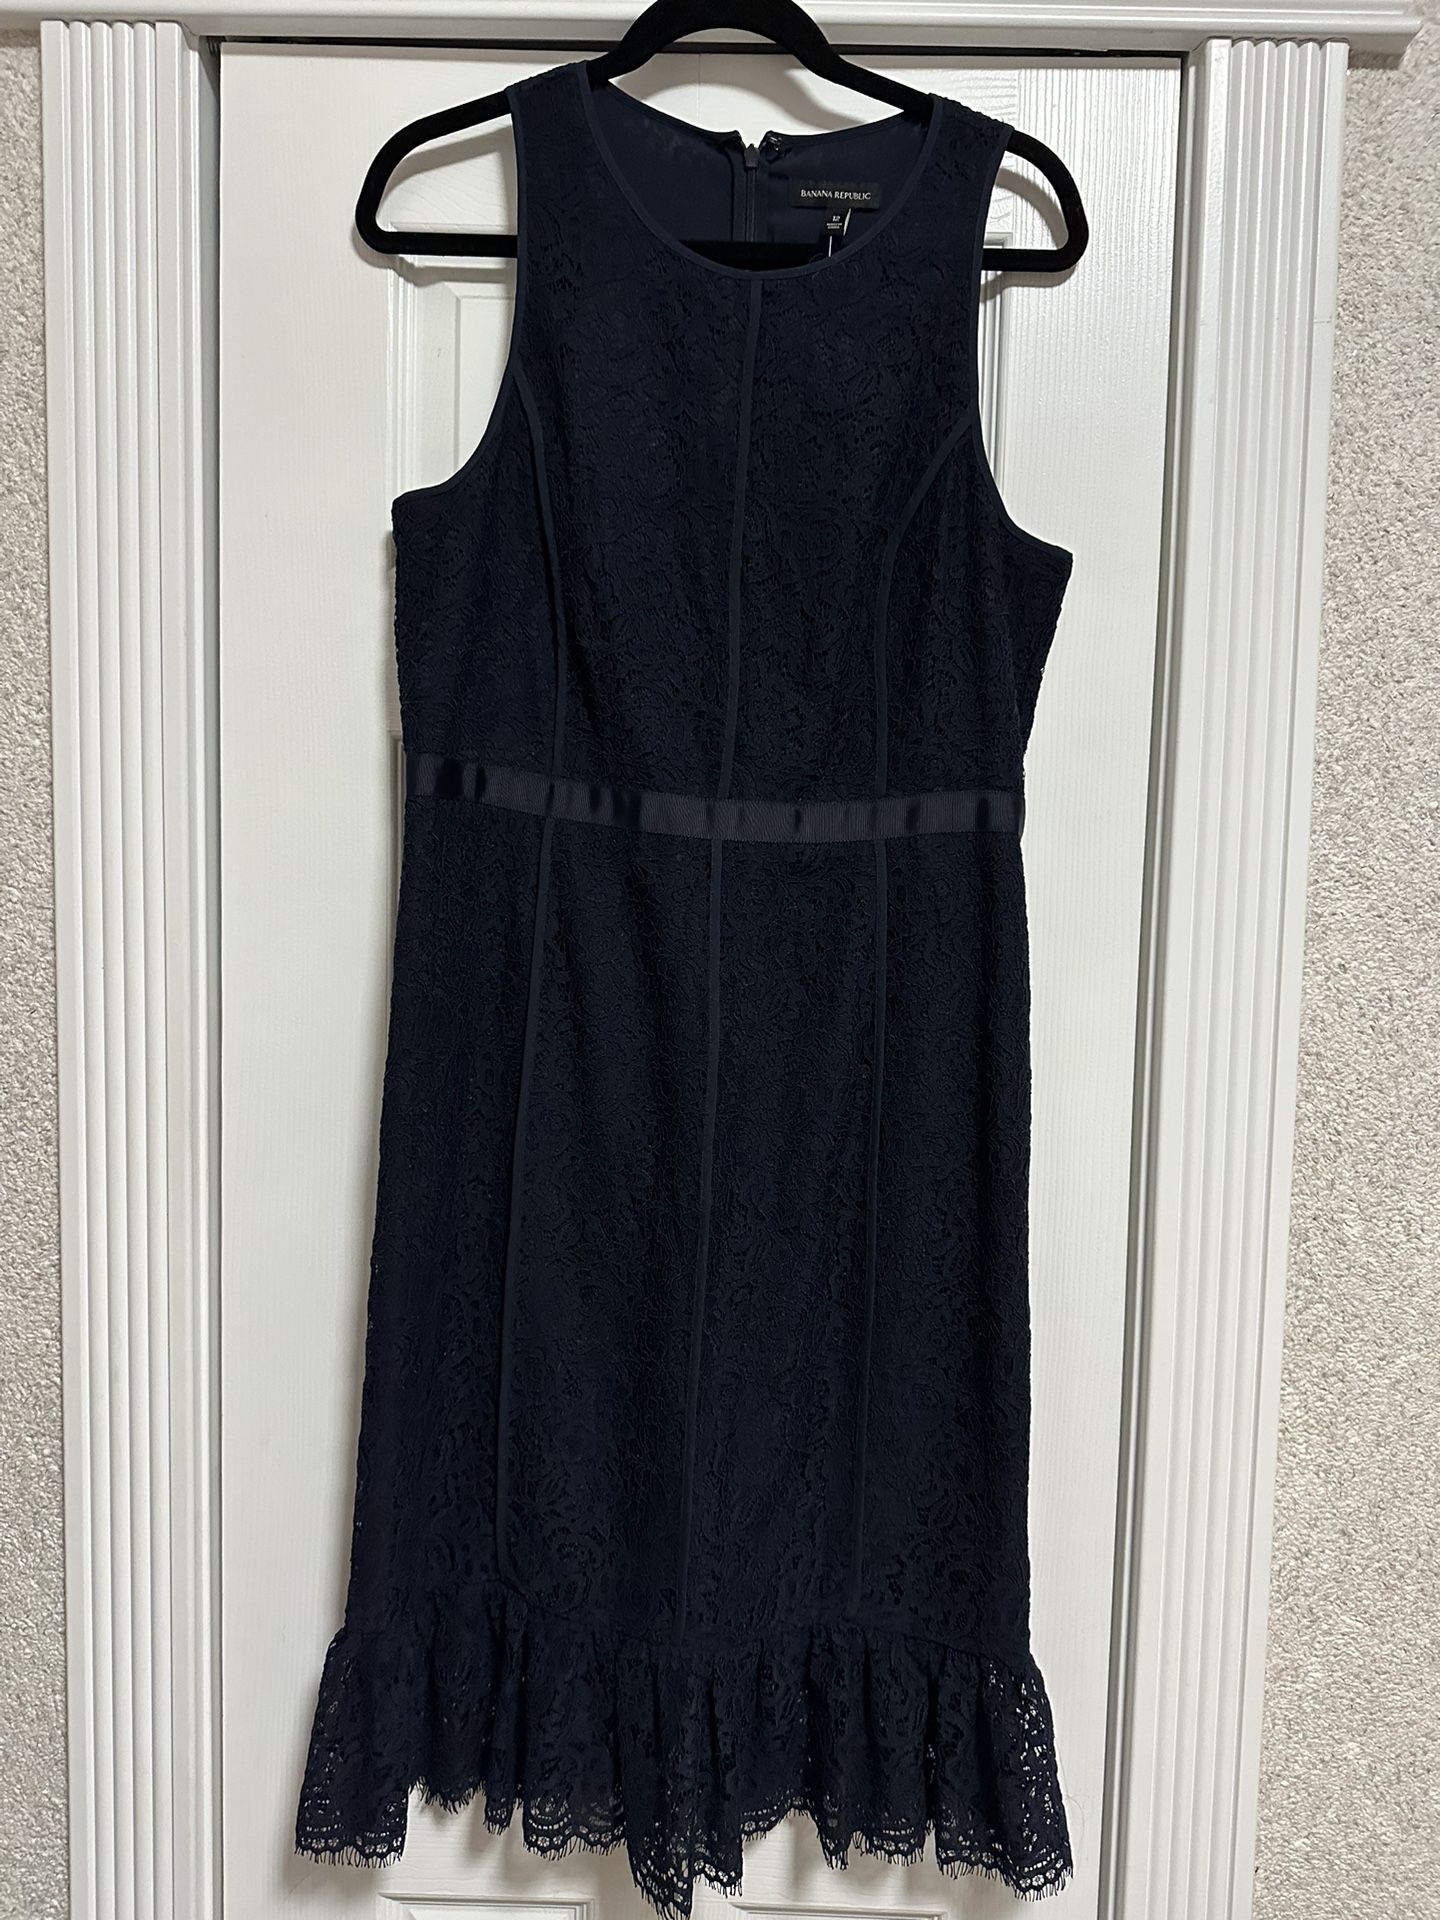 Banana Republic Dress Size 12. New With Tag. 